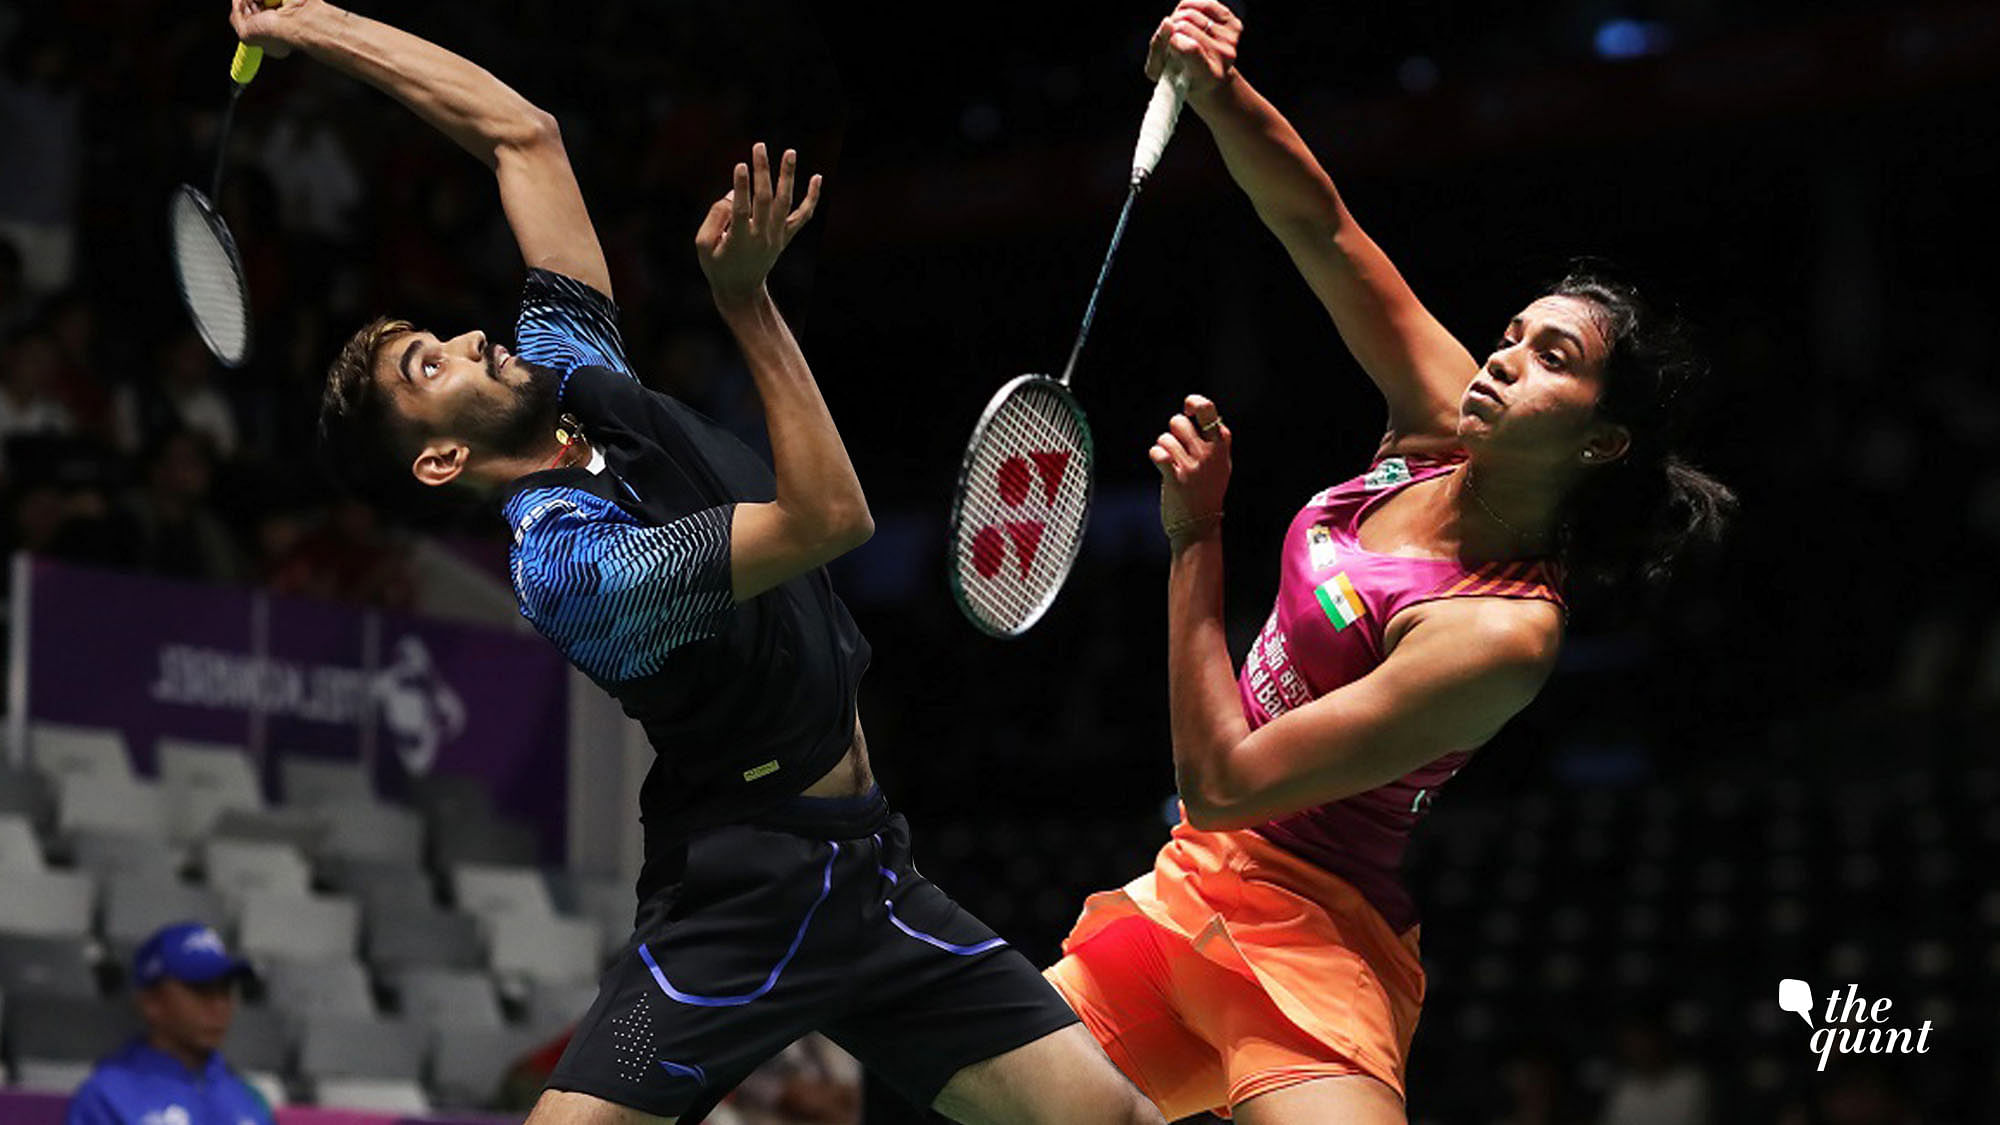 Kidambi Srikanth and PV Sindhi have not won a title so far in 2018.